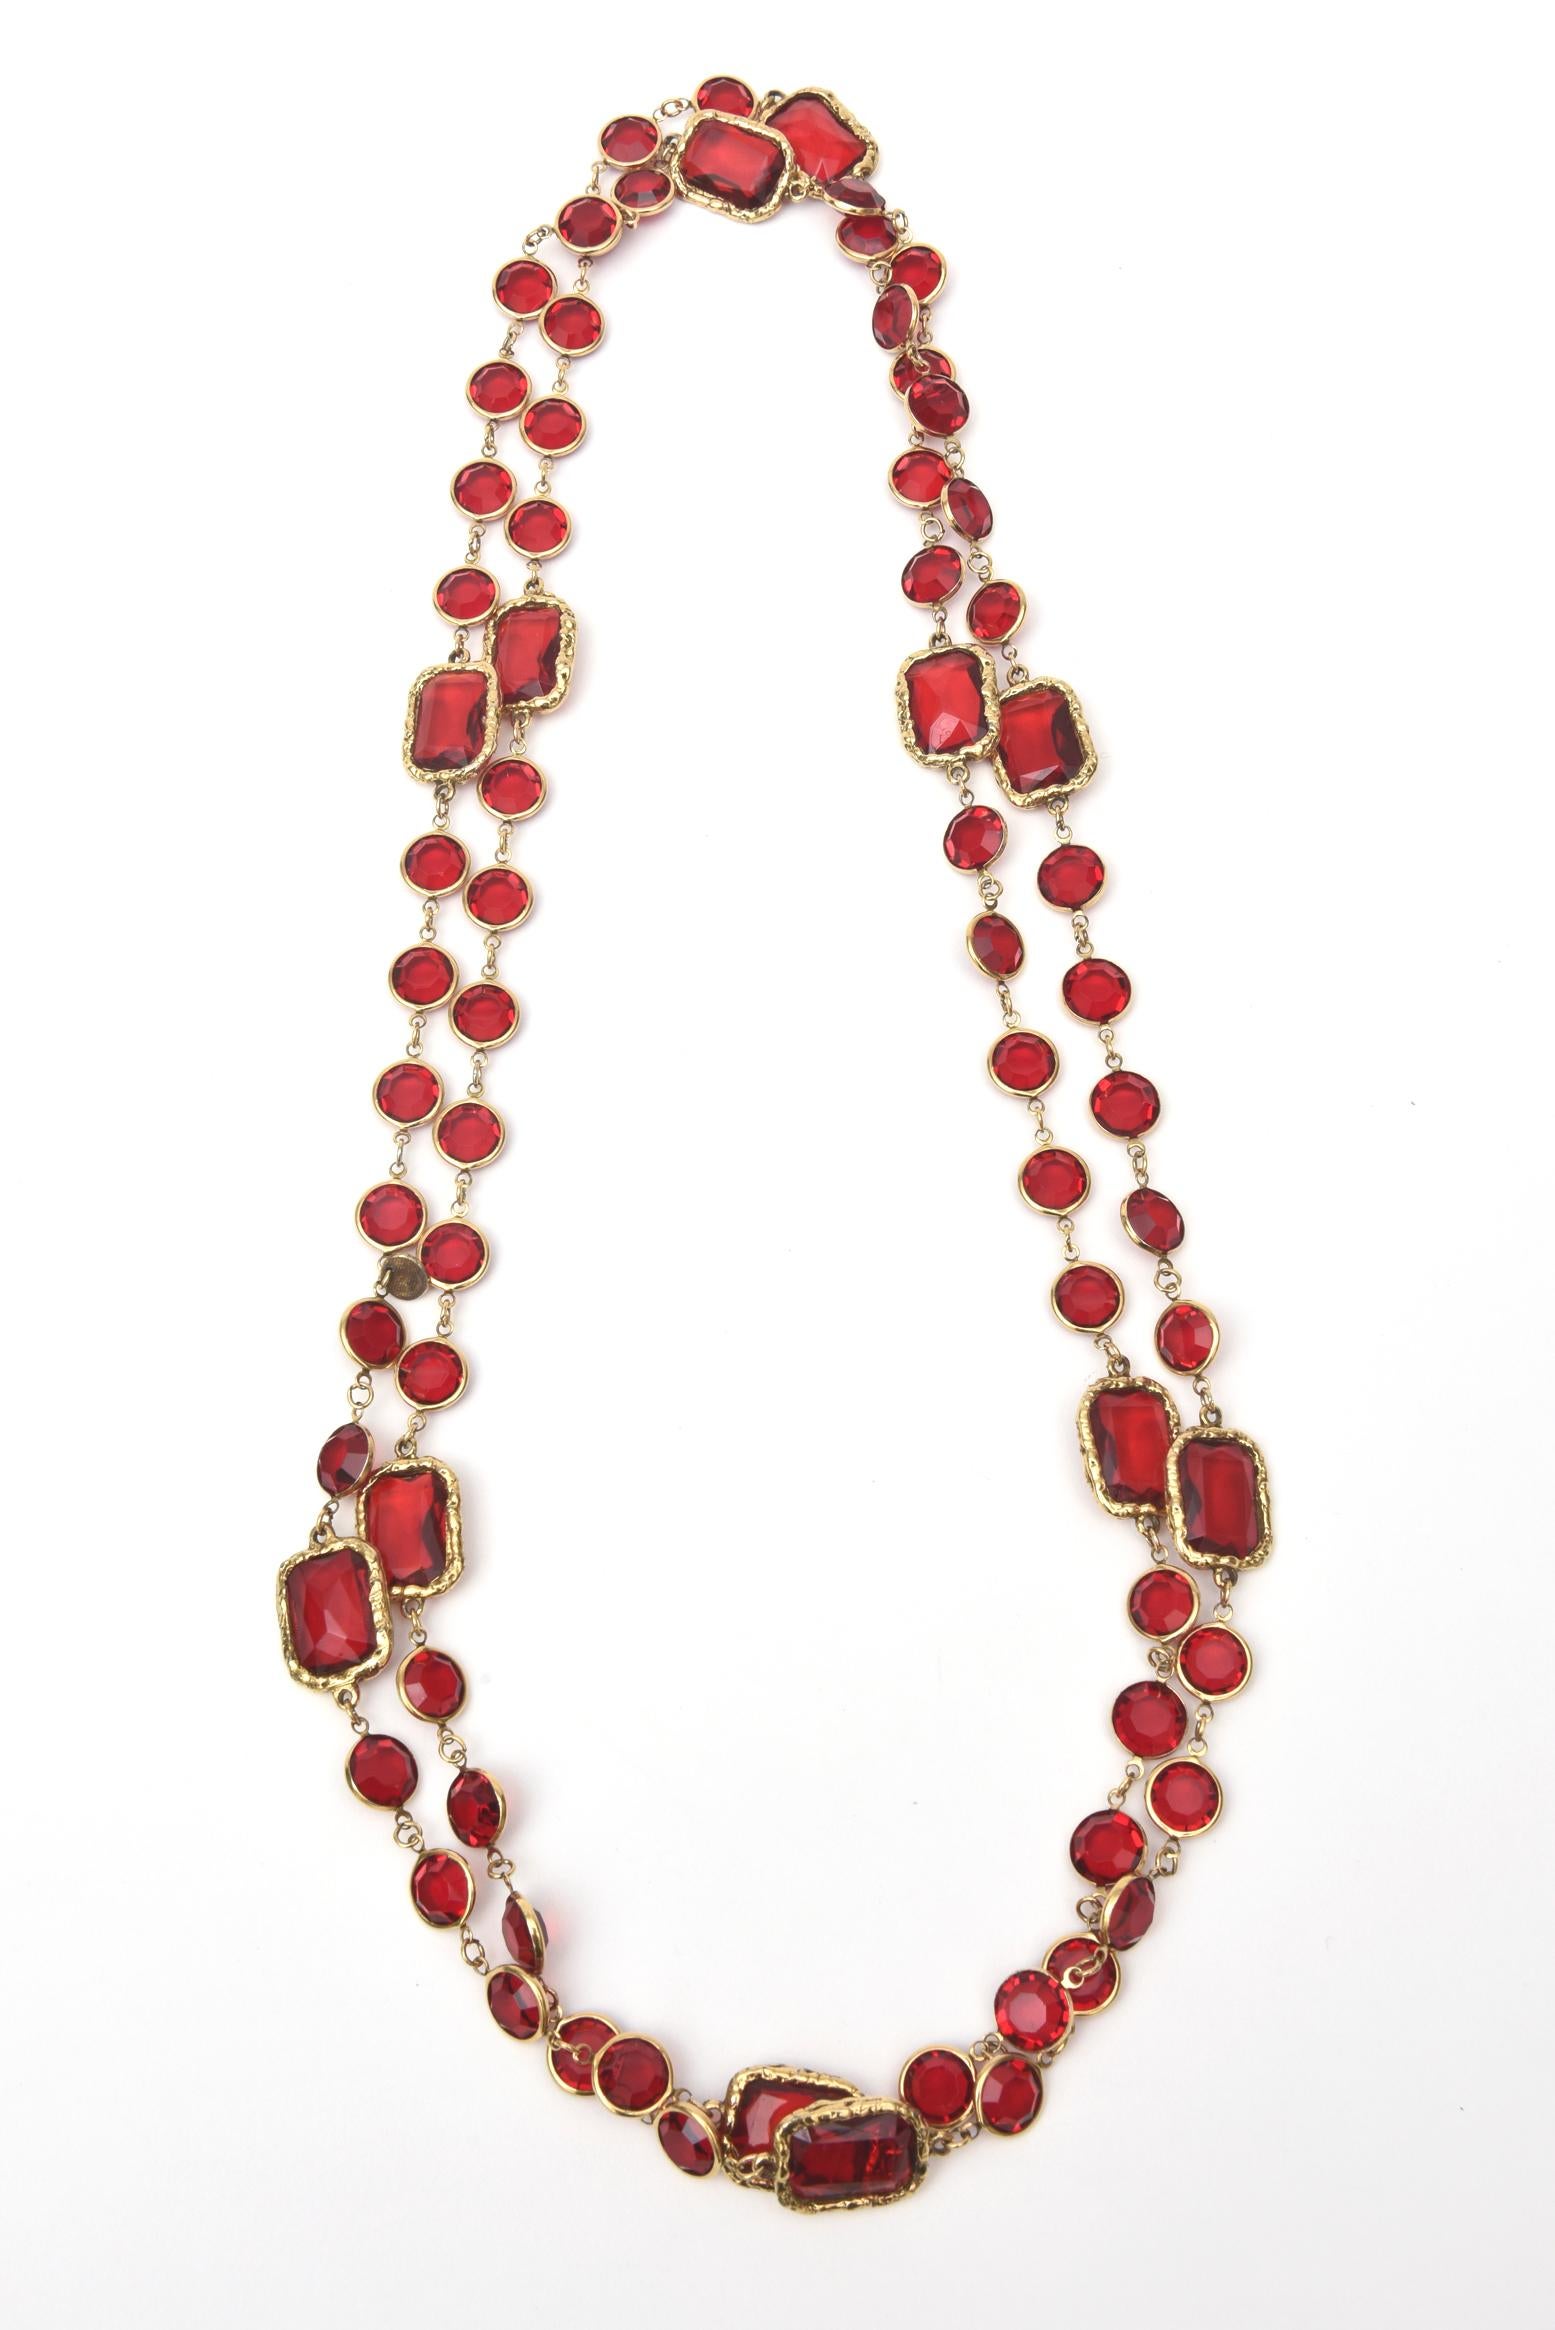 This stunning vintage long Chanel ruby red crystal and gold tone chicklet sautoir long necklace has bezel set crystals. It is vintage and from 1981. This is when Chanel produced these first. This is now a unique and a Chanel rarity. It is signed and